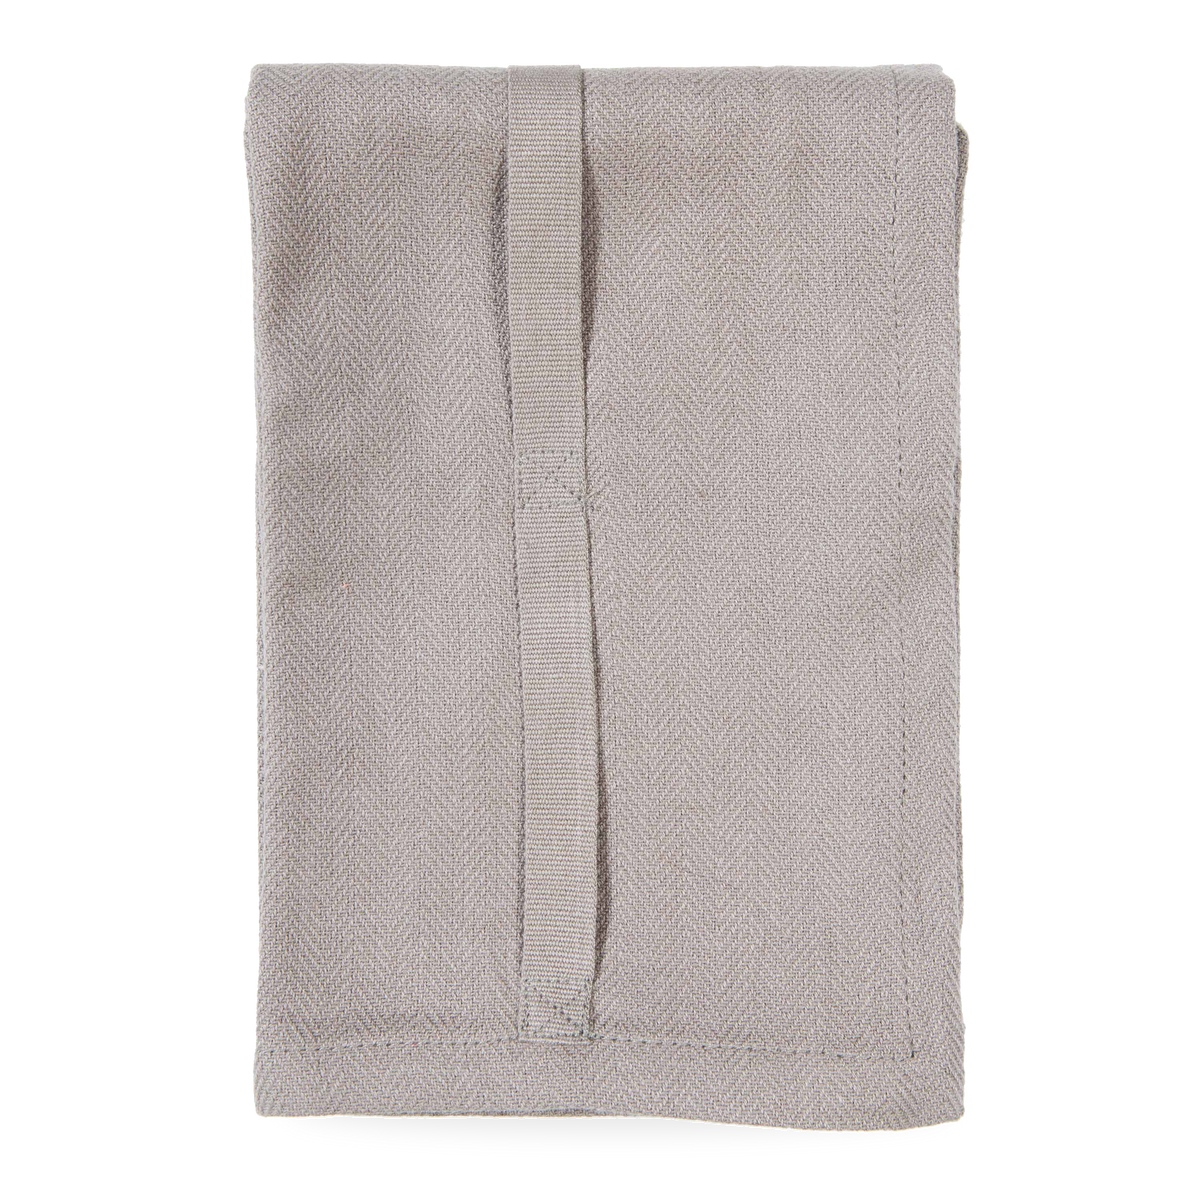 Woven with certified high-quality fabrics, this Organic Cotton Kitchen Towel is designed to absorb, to last and to add a modern touch to your kitchen collection.